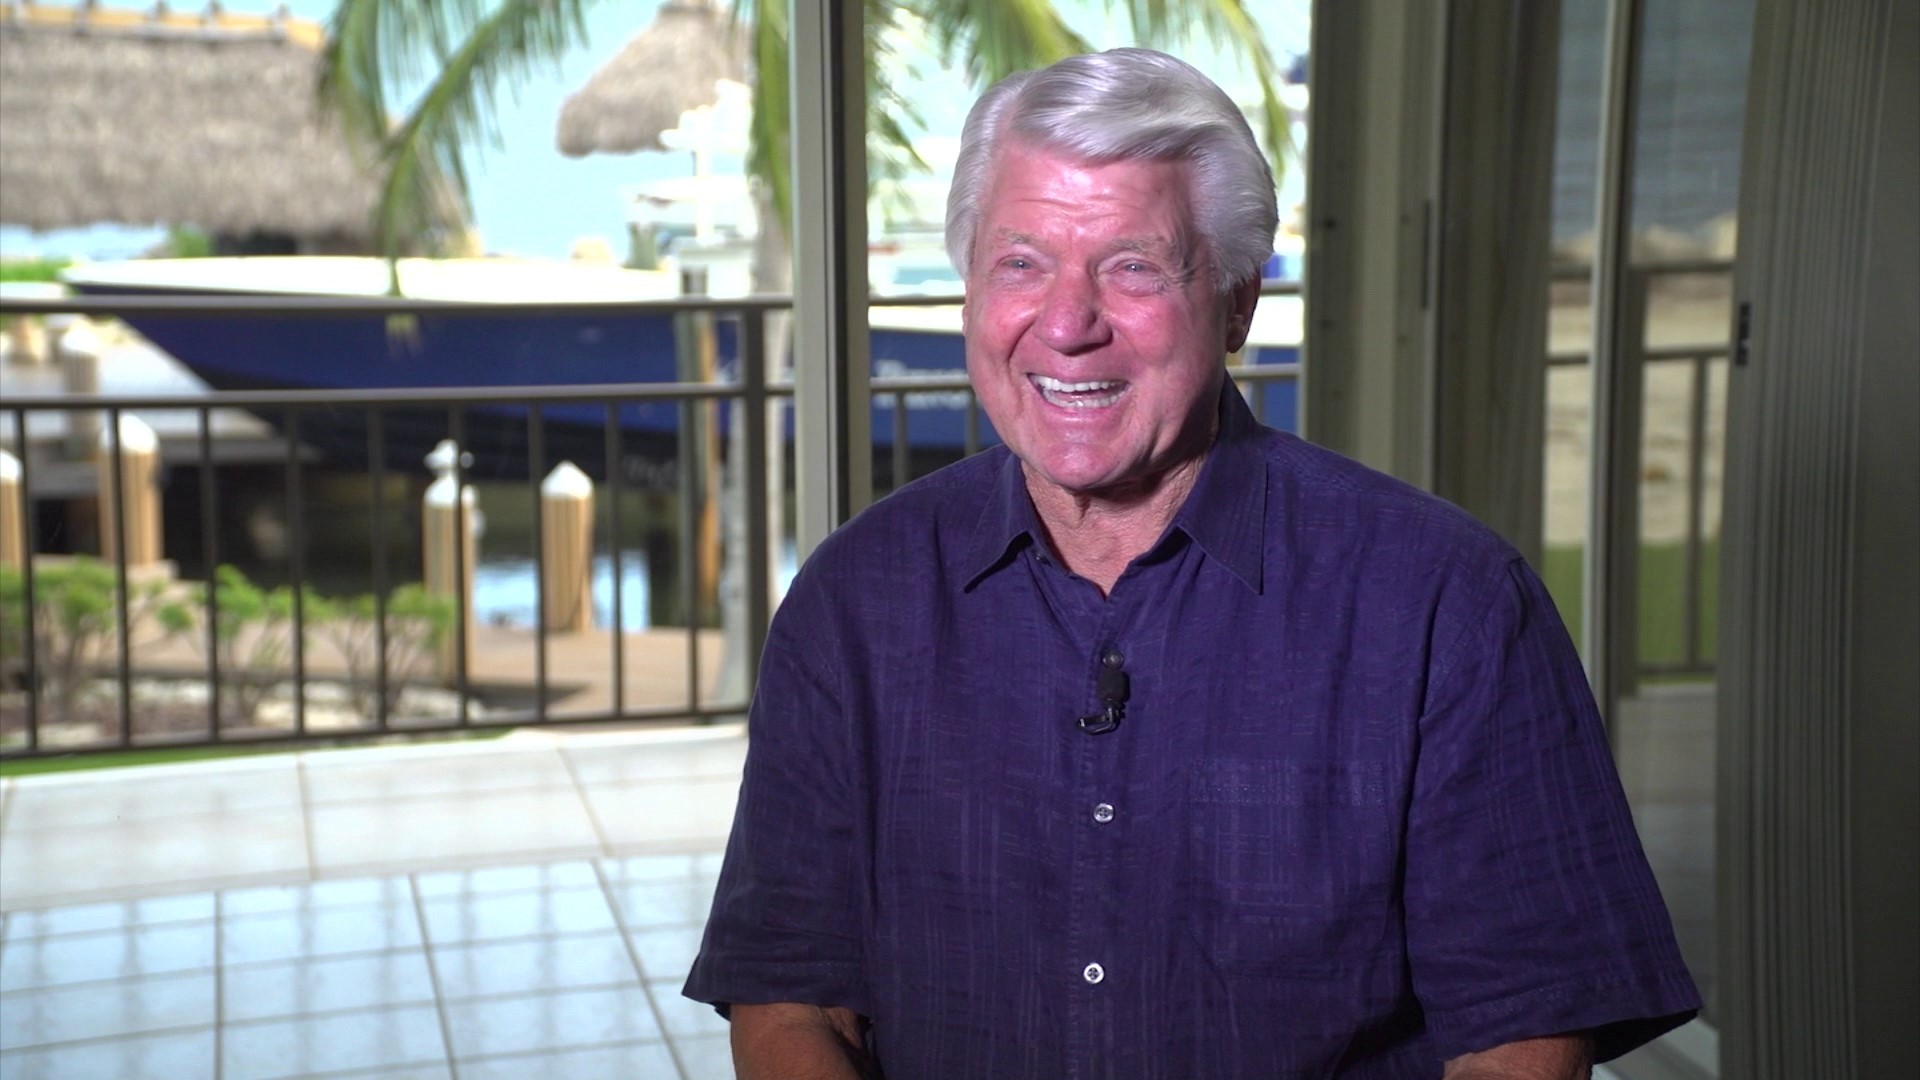 WFAA's Joe Trahan talks with former Dallas Cowboys coach Jimmy Johnson about his current life in the Florida Keys, and the Super Bowl success of the Cowboys.